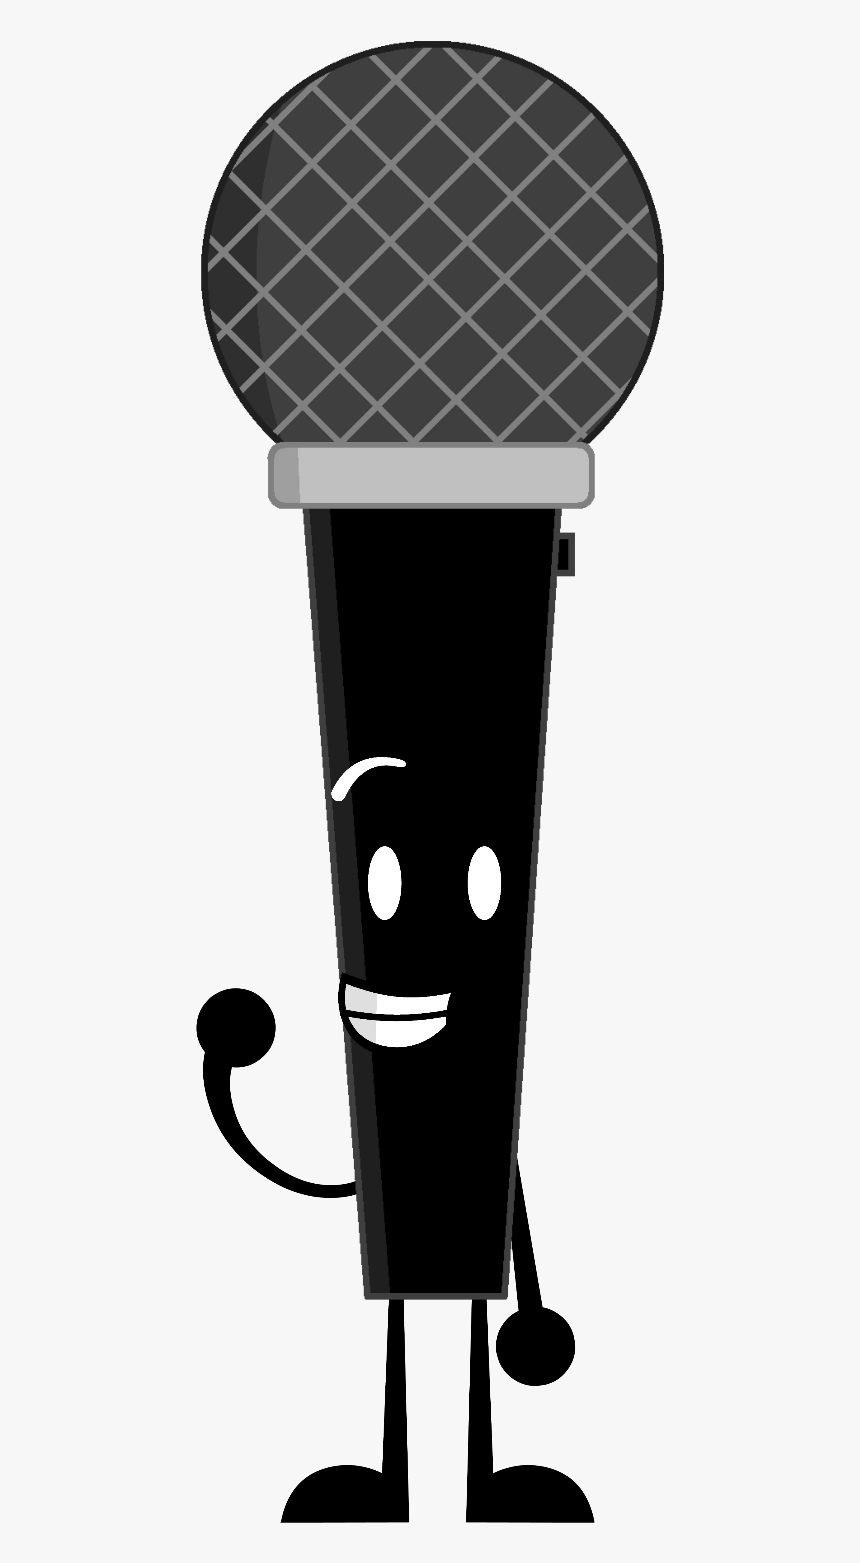 Object Oppose Wiki - Object Oppose Microphone, HD Png Download, Free Download